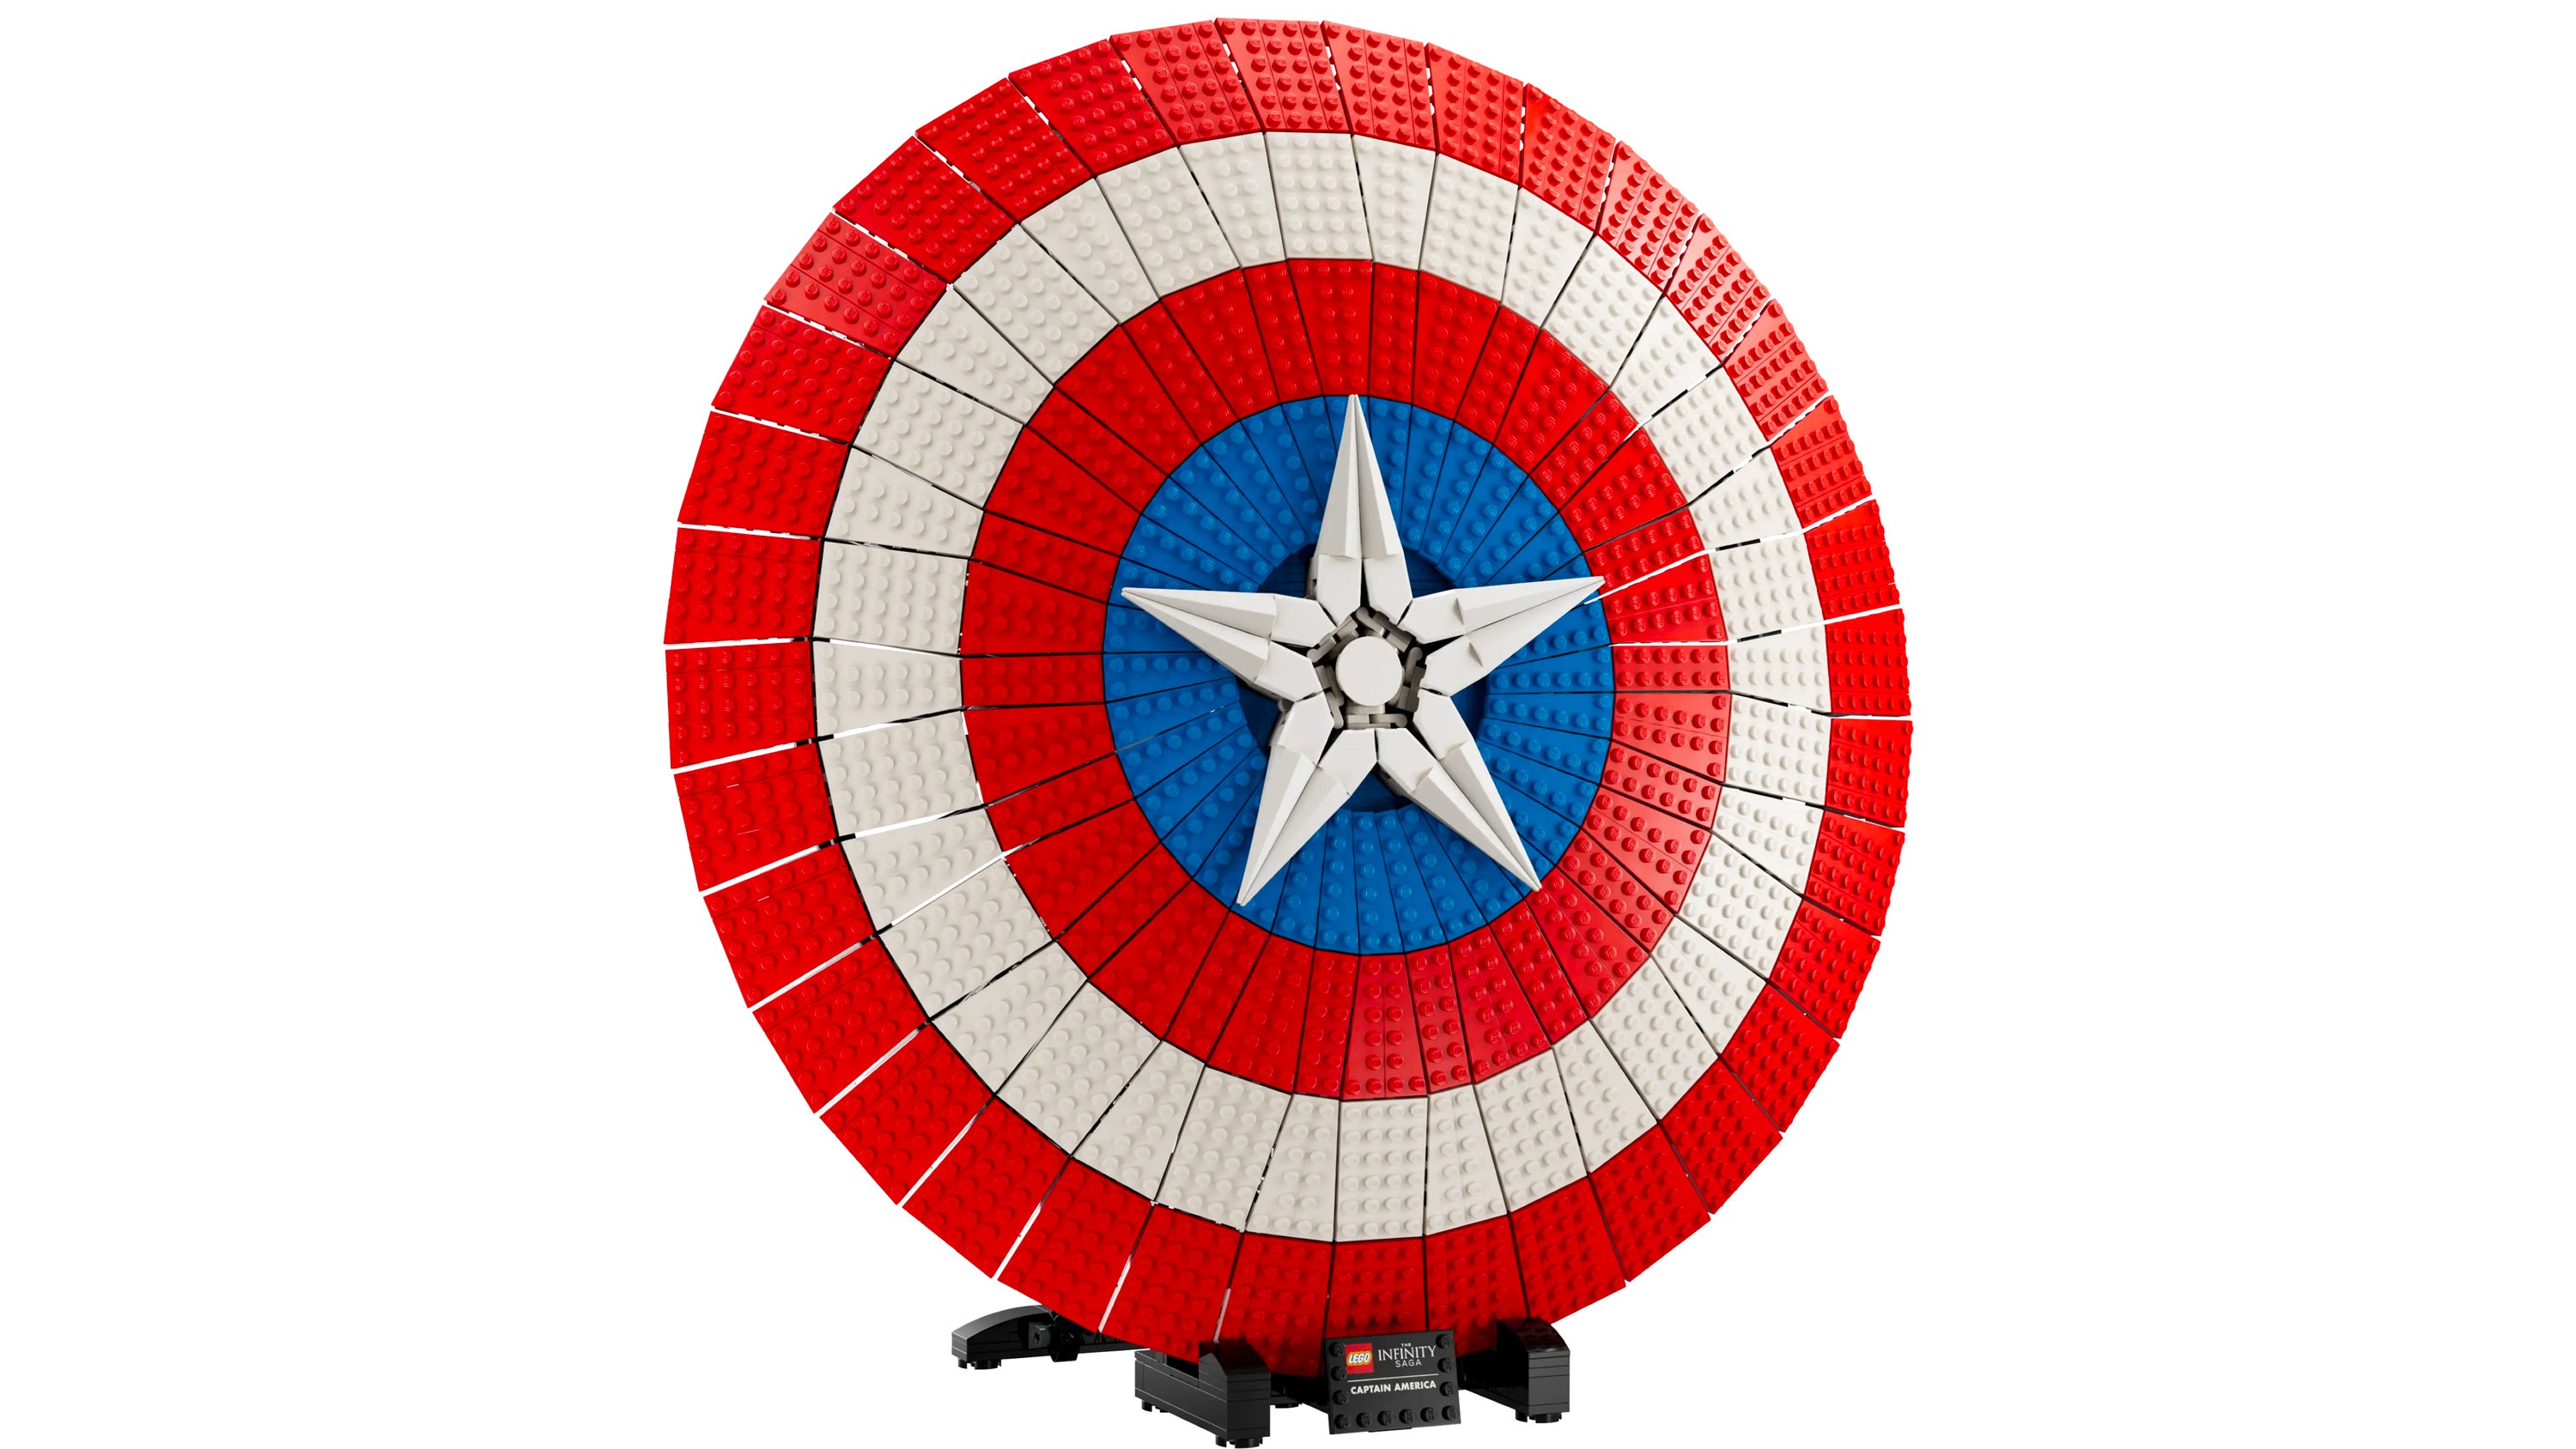 Do Not Throw LEGO’s $320 Captain America Shield at Bad Guys, It Will Not Bounce